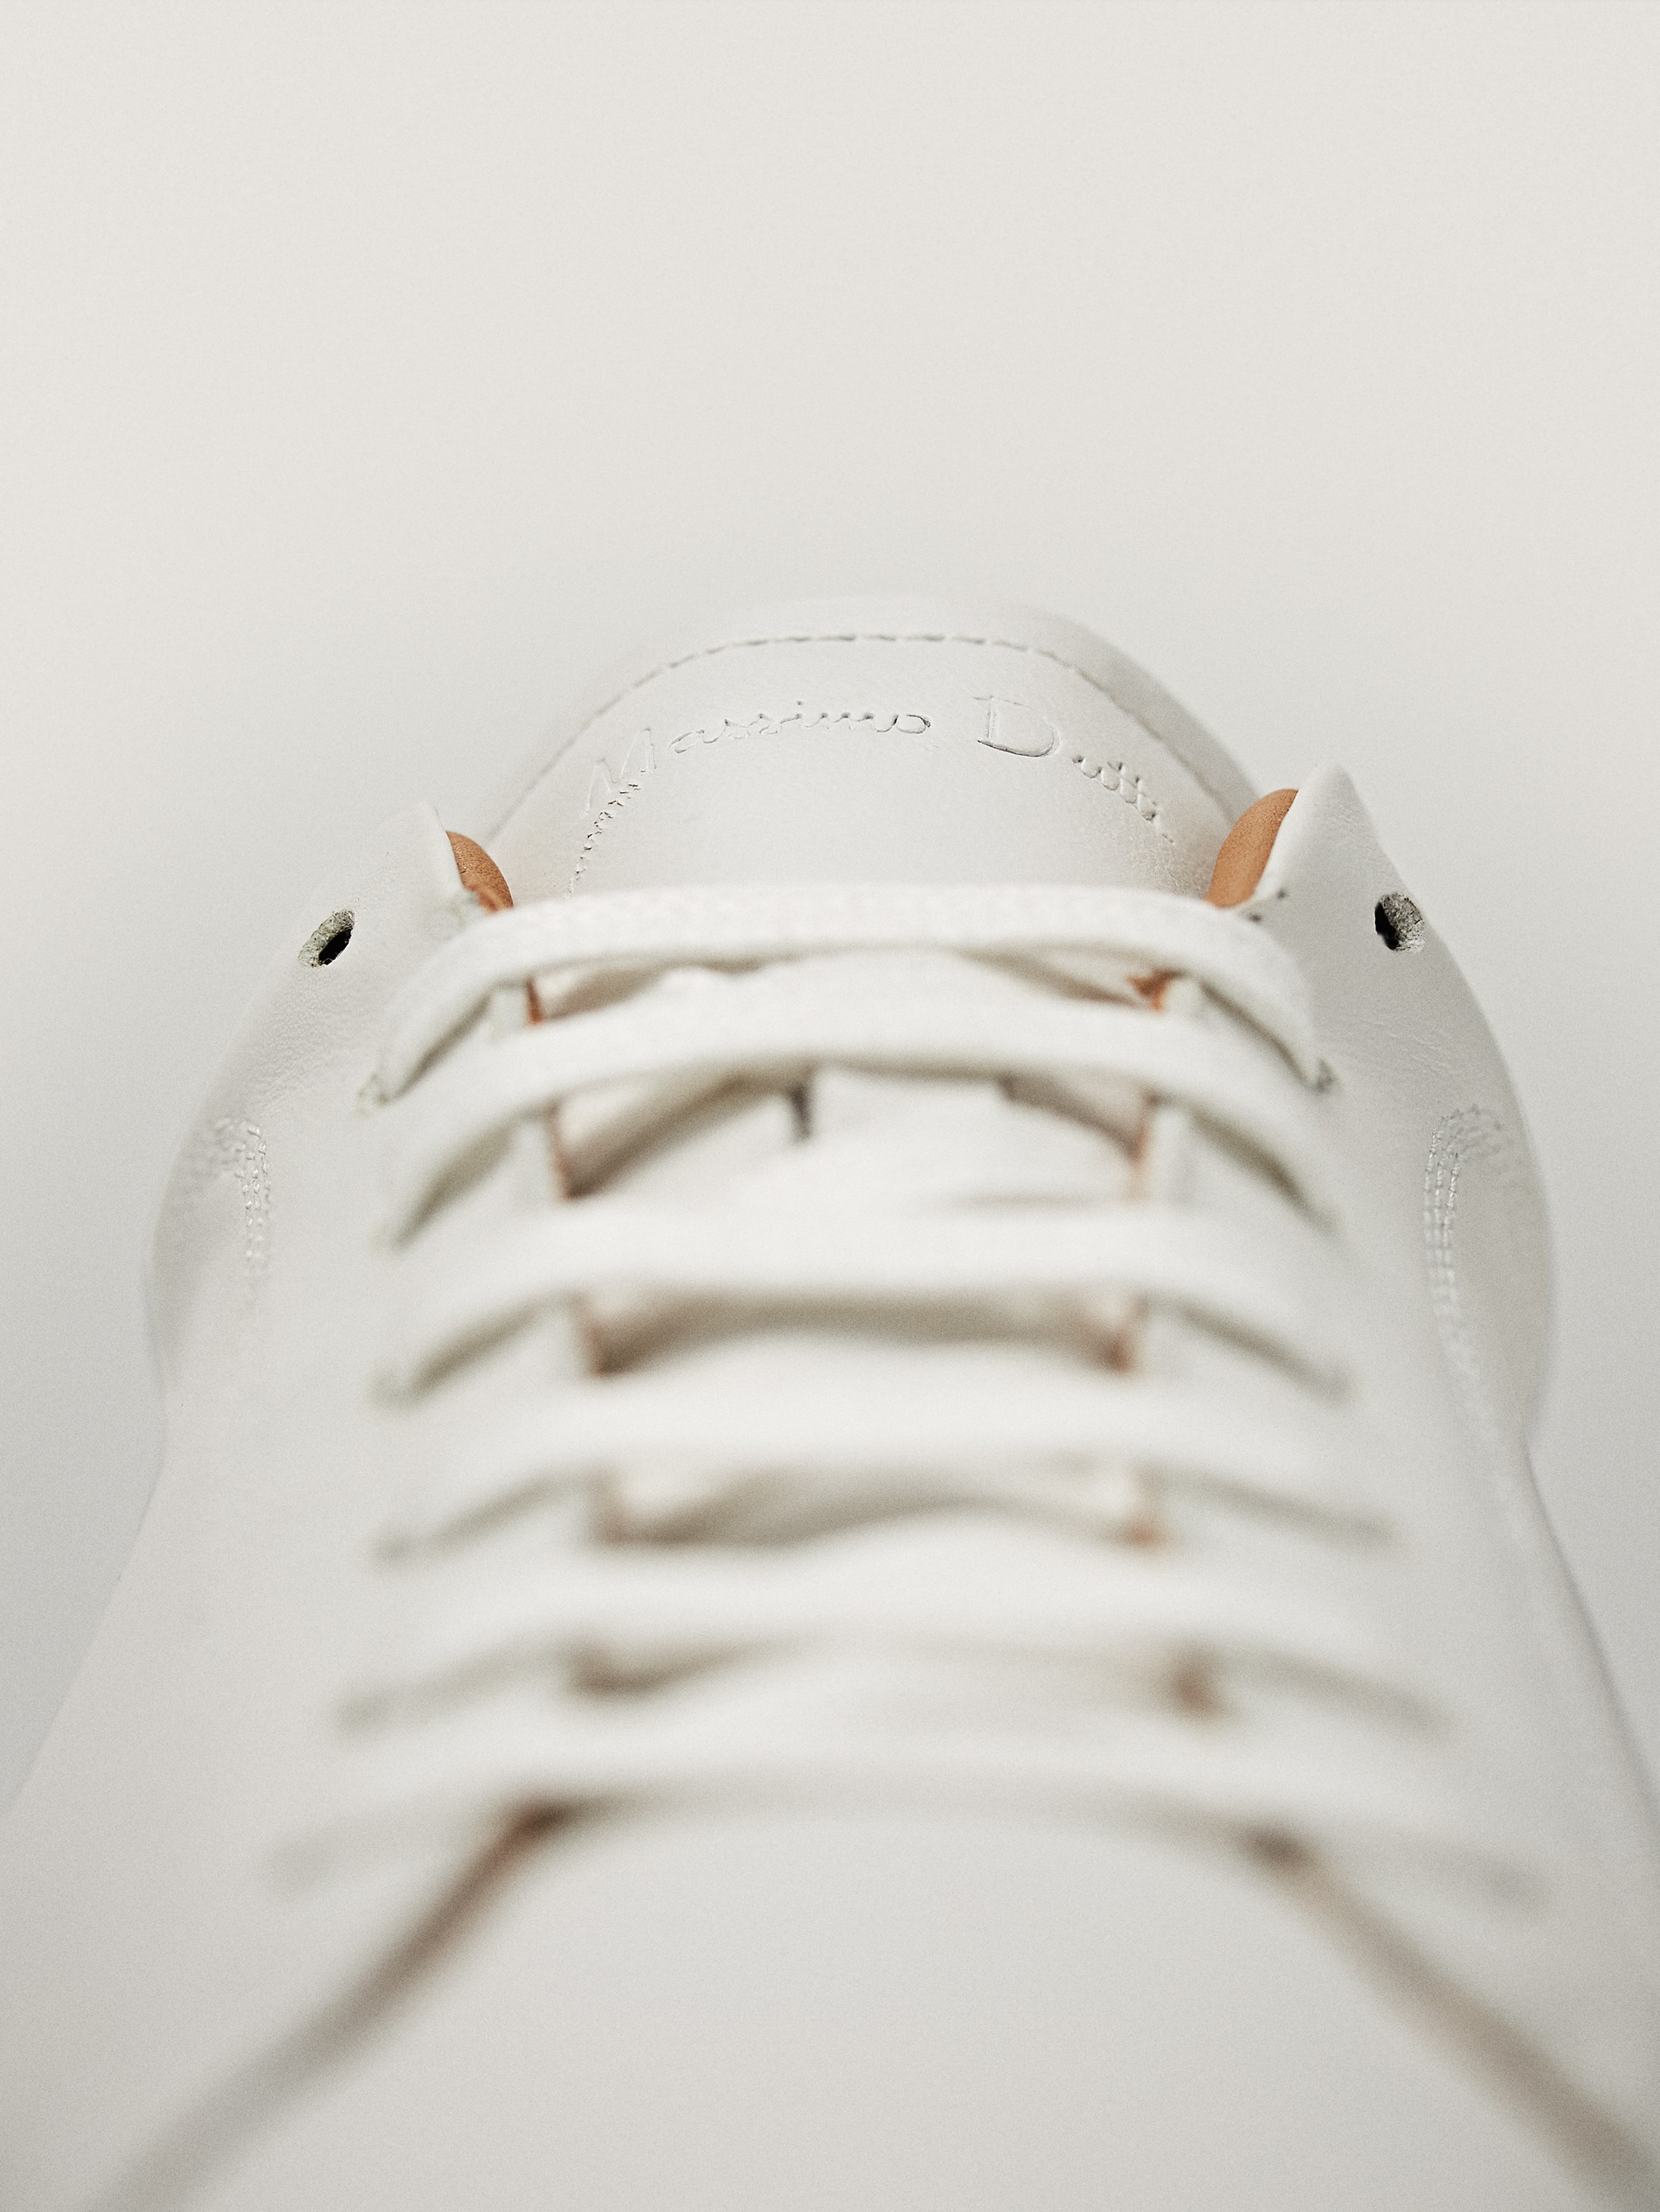 WHITE TRAINERS WITH HEEL TAB - Men 